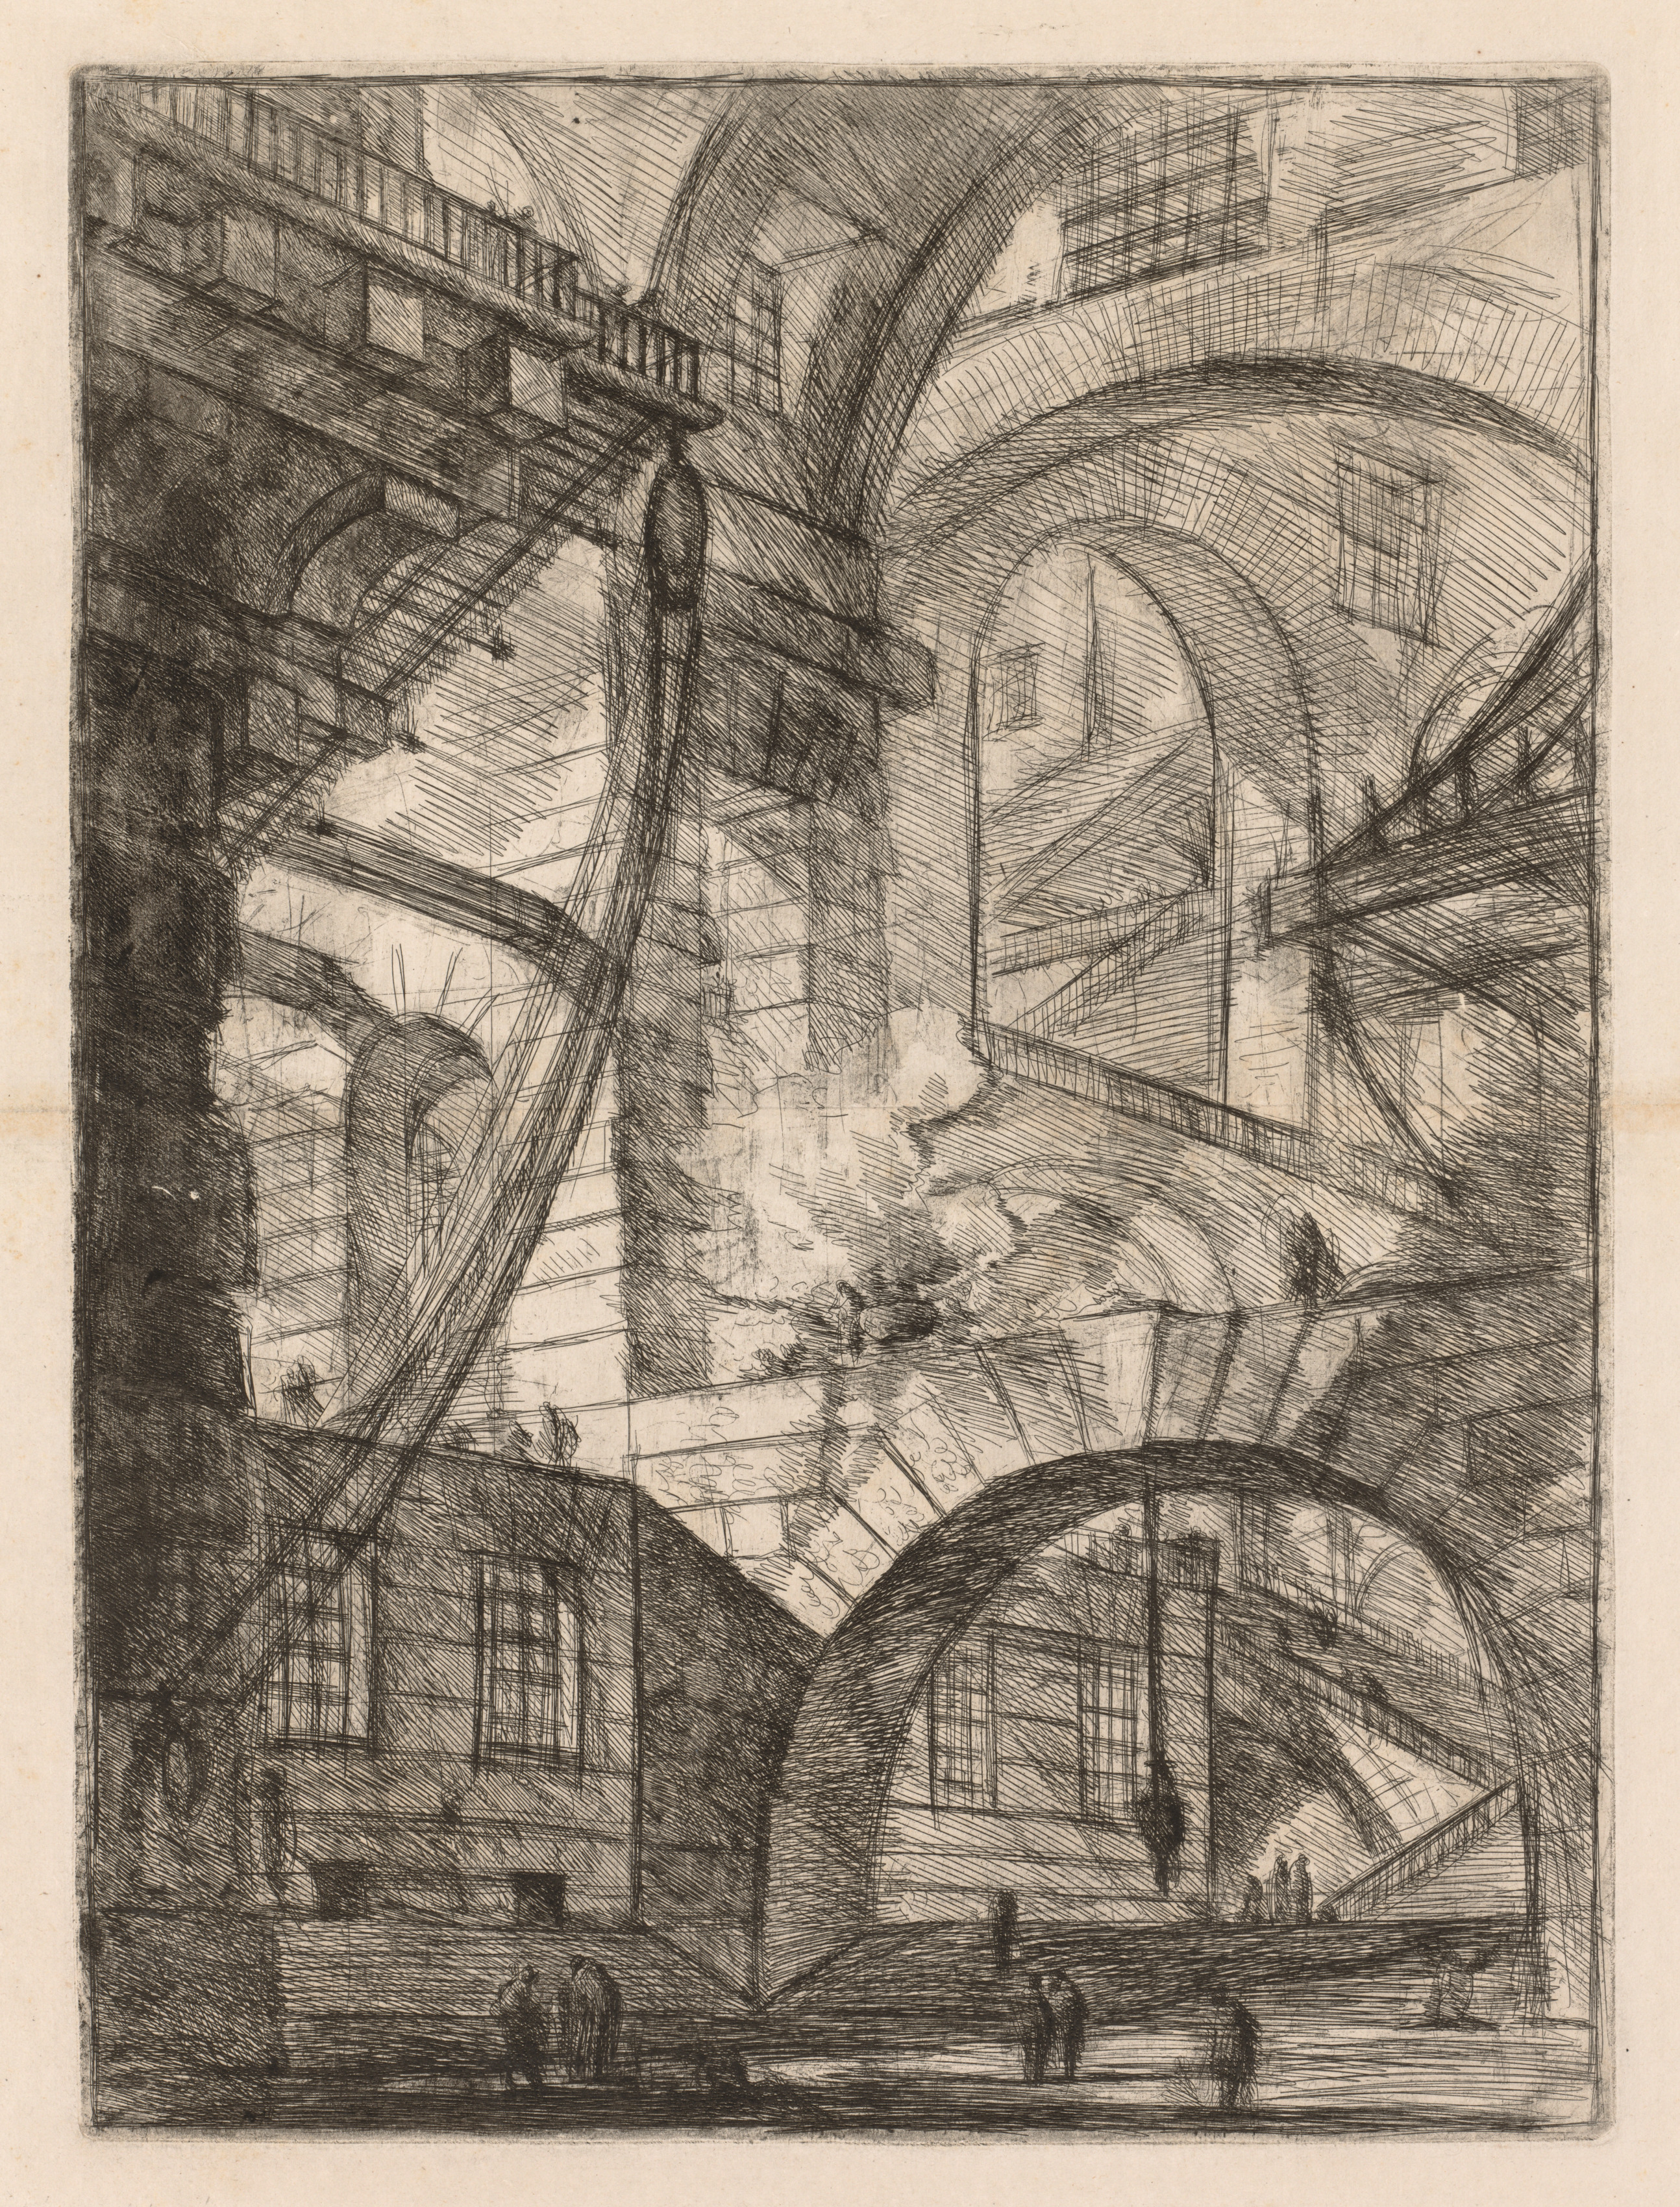 The Prisons:  A Perspective of Arches with a Smoking Fire